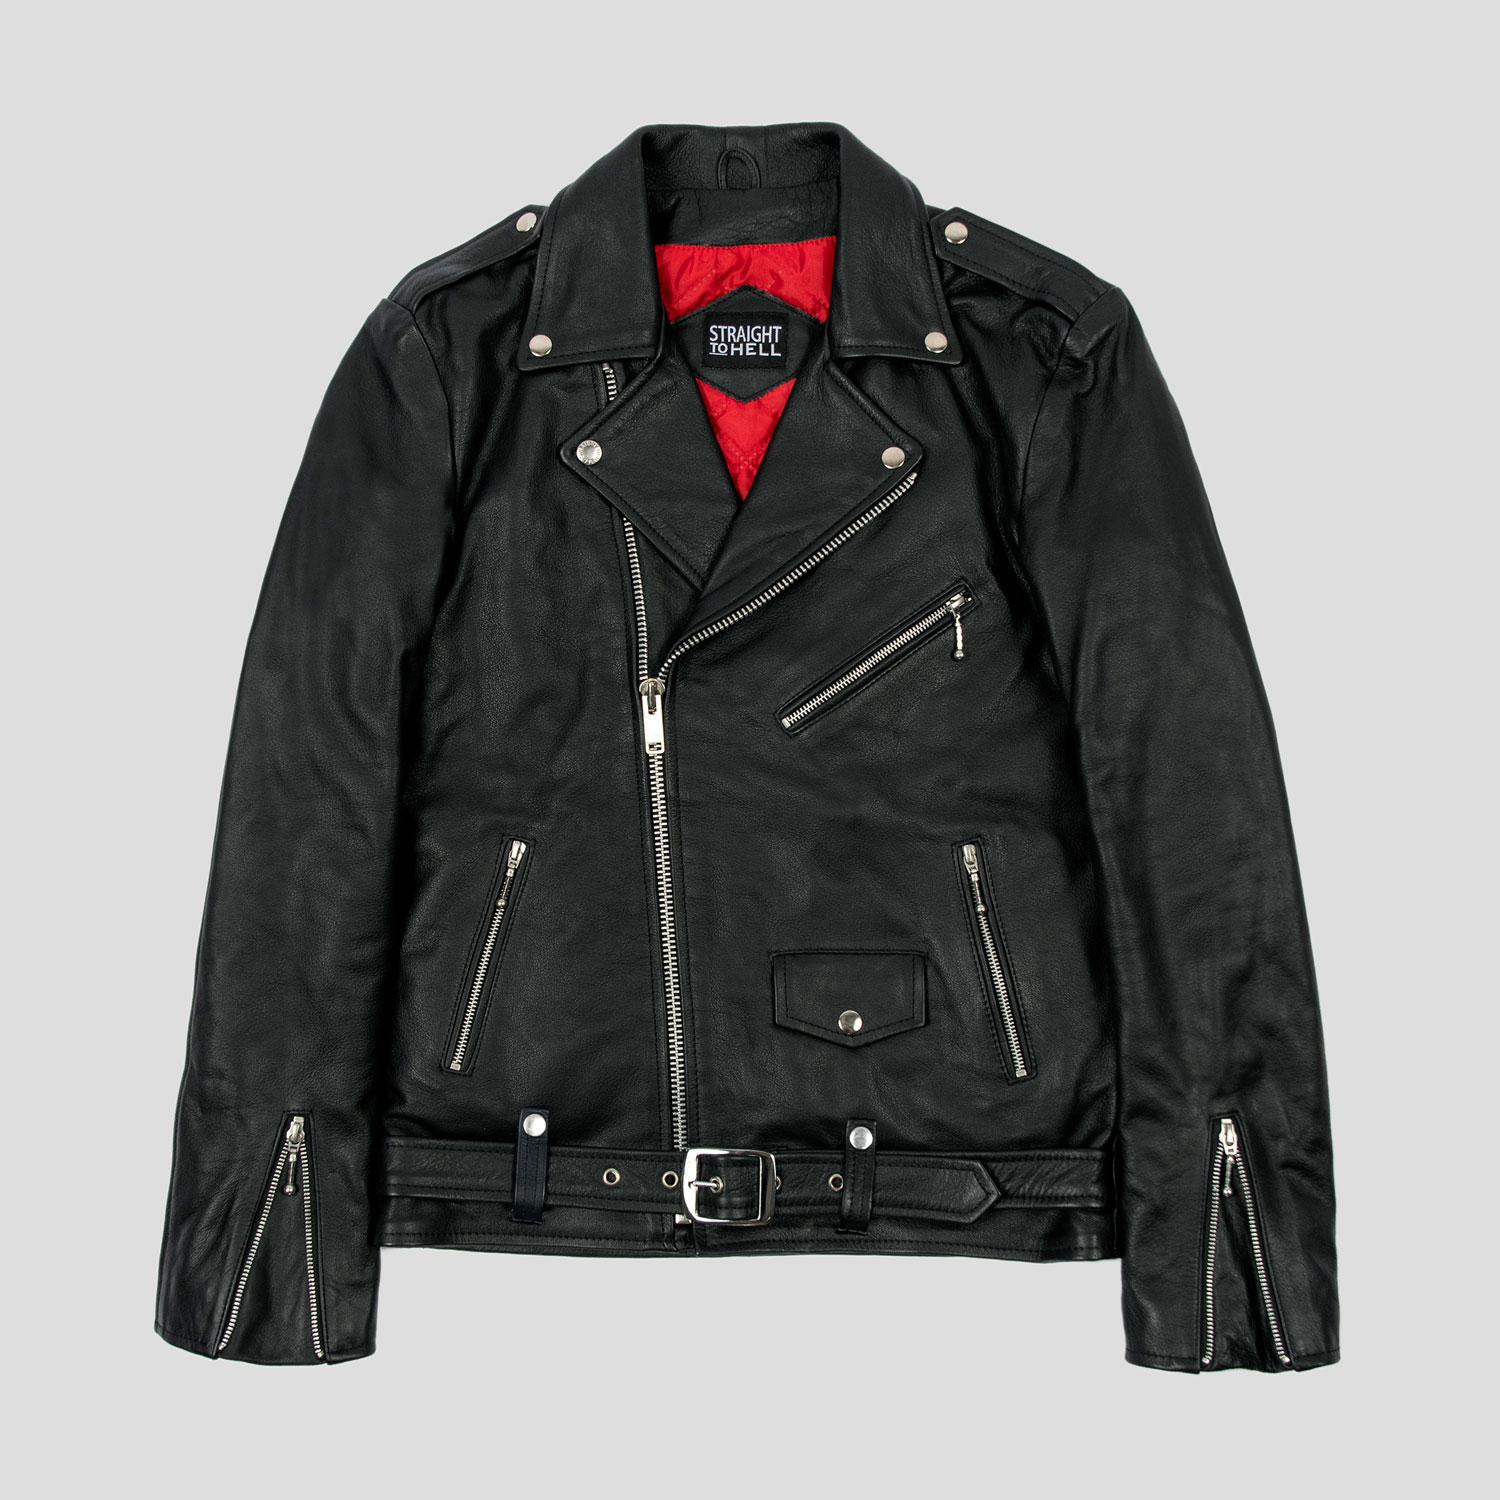 For Tall Apparel - Black Leather and Jacket Hell | Nickel To Men Long Commando - Straight